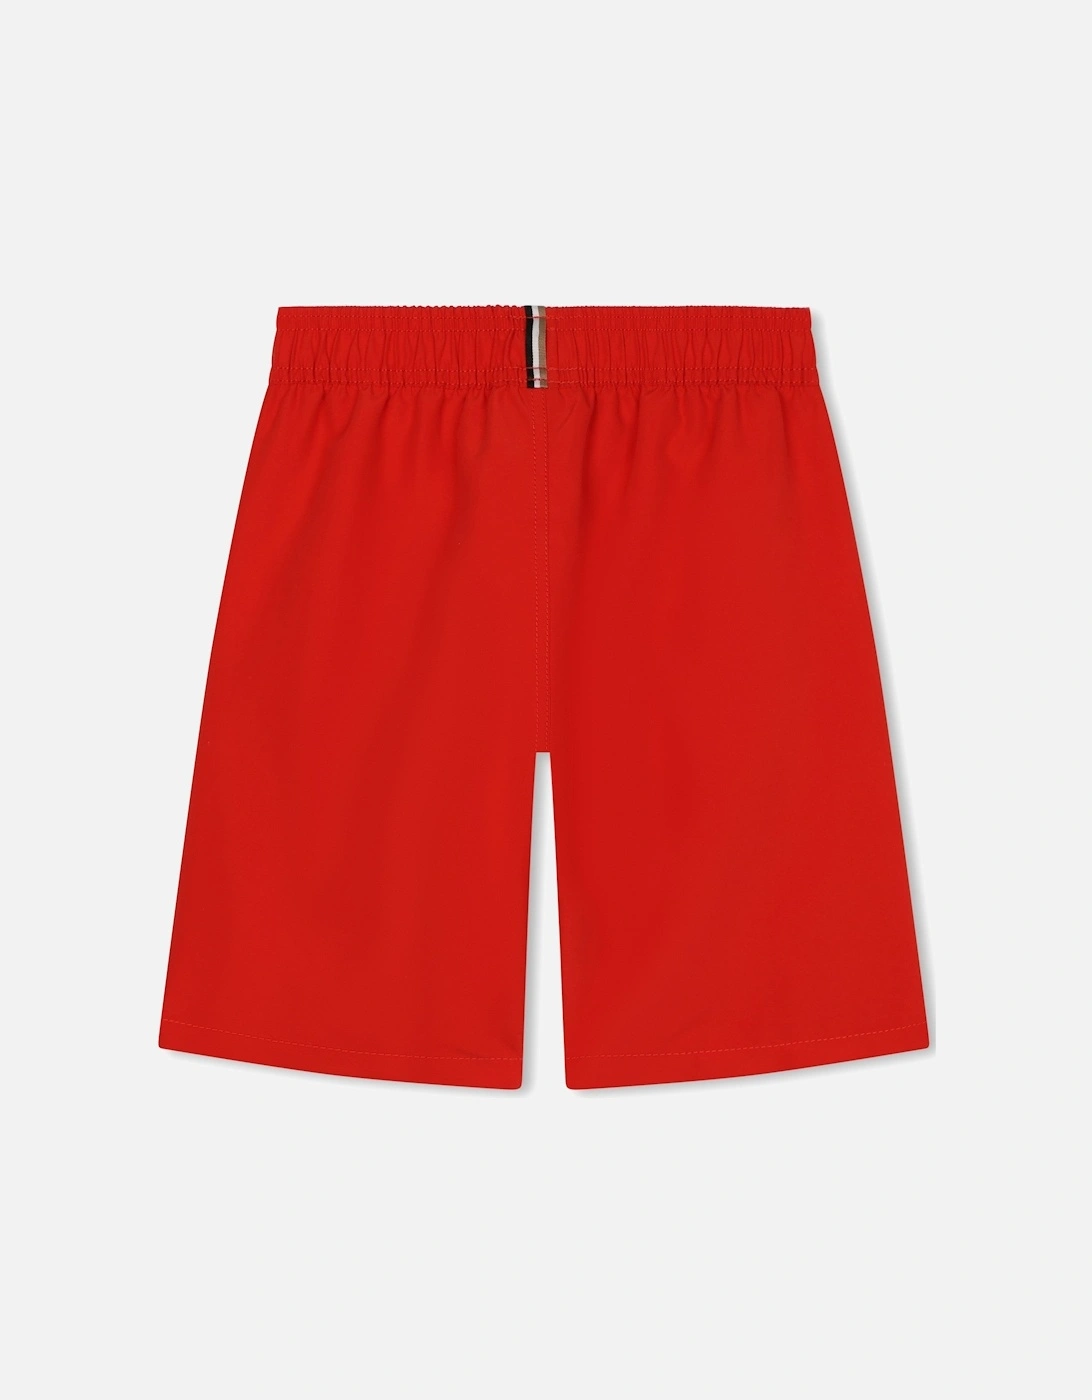 BABY/TODDLER BRIGHT RED SWIMSHORTS